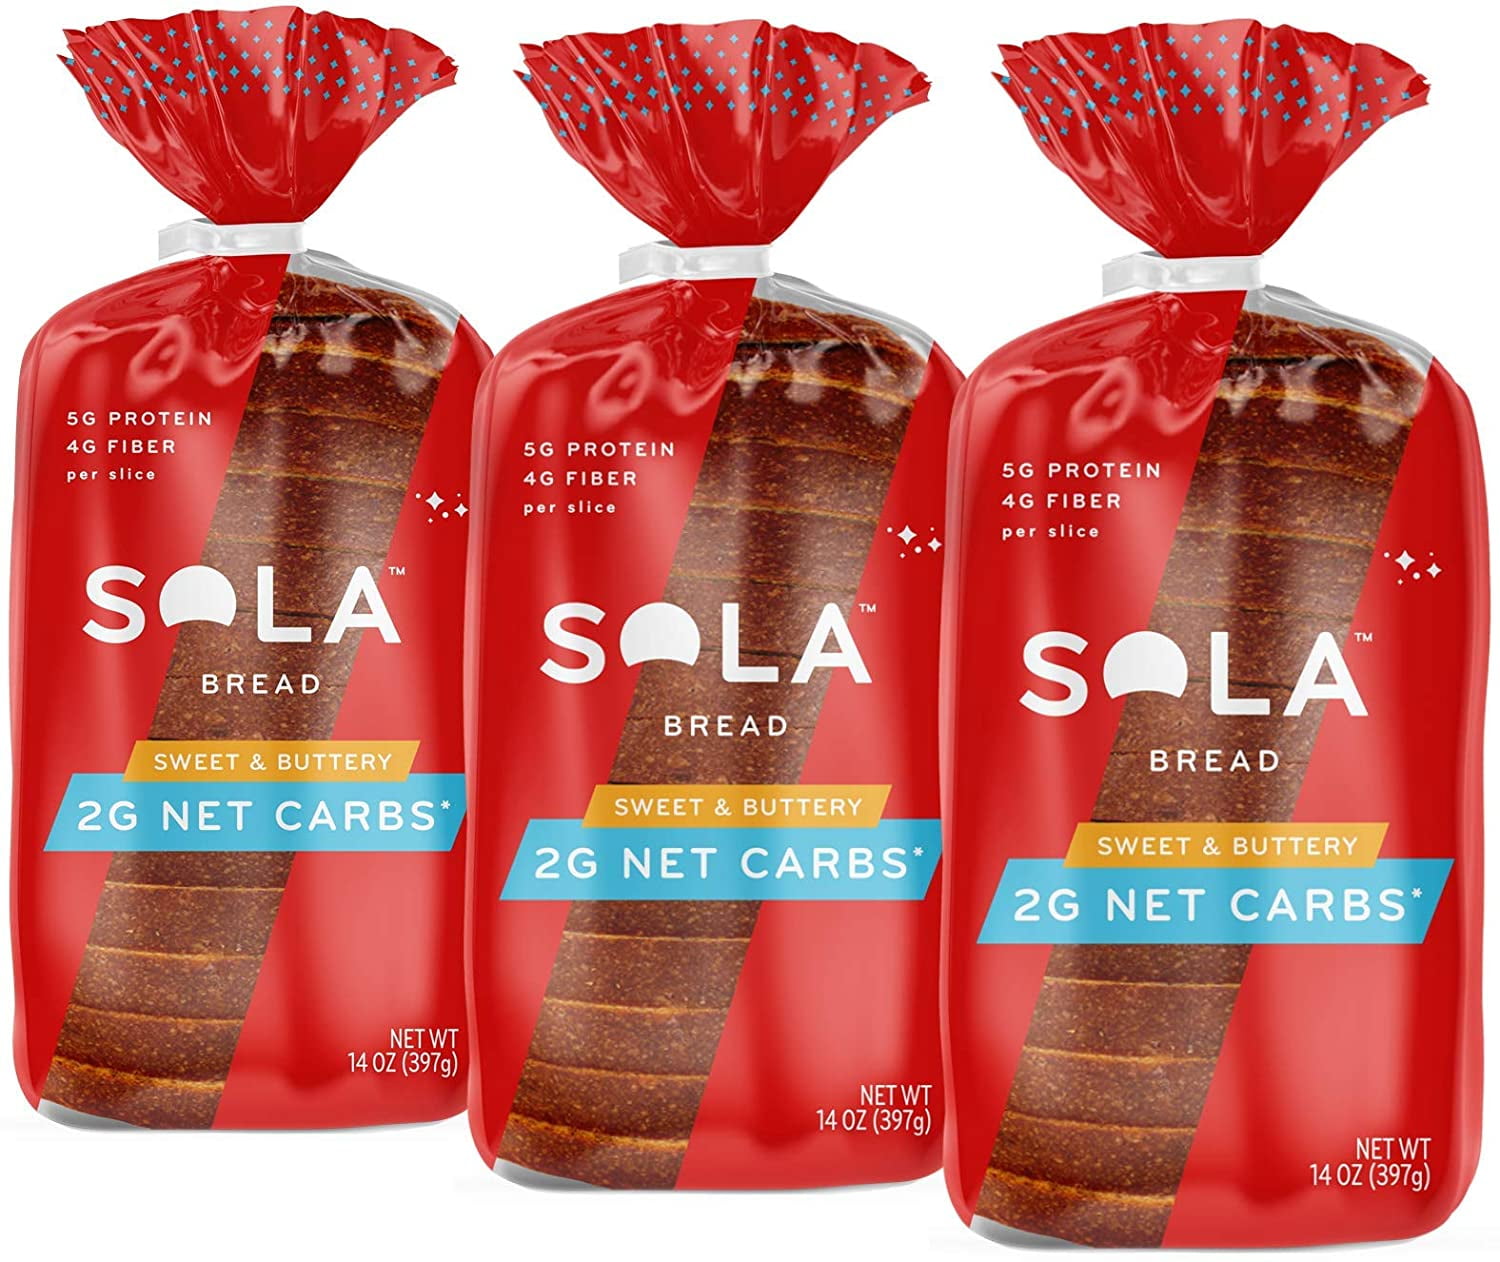 Sola Sweet And Buttery Bread Low Carb Low Calorie Reduced Sugar 5g Protein Per Slice 14 Oz Loaf Of Sandwich Bread Pack Of 3 Walmart Com Walmart Com